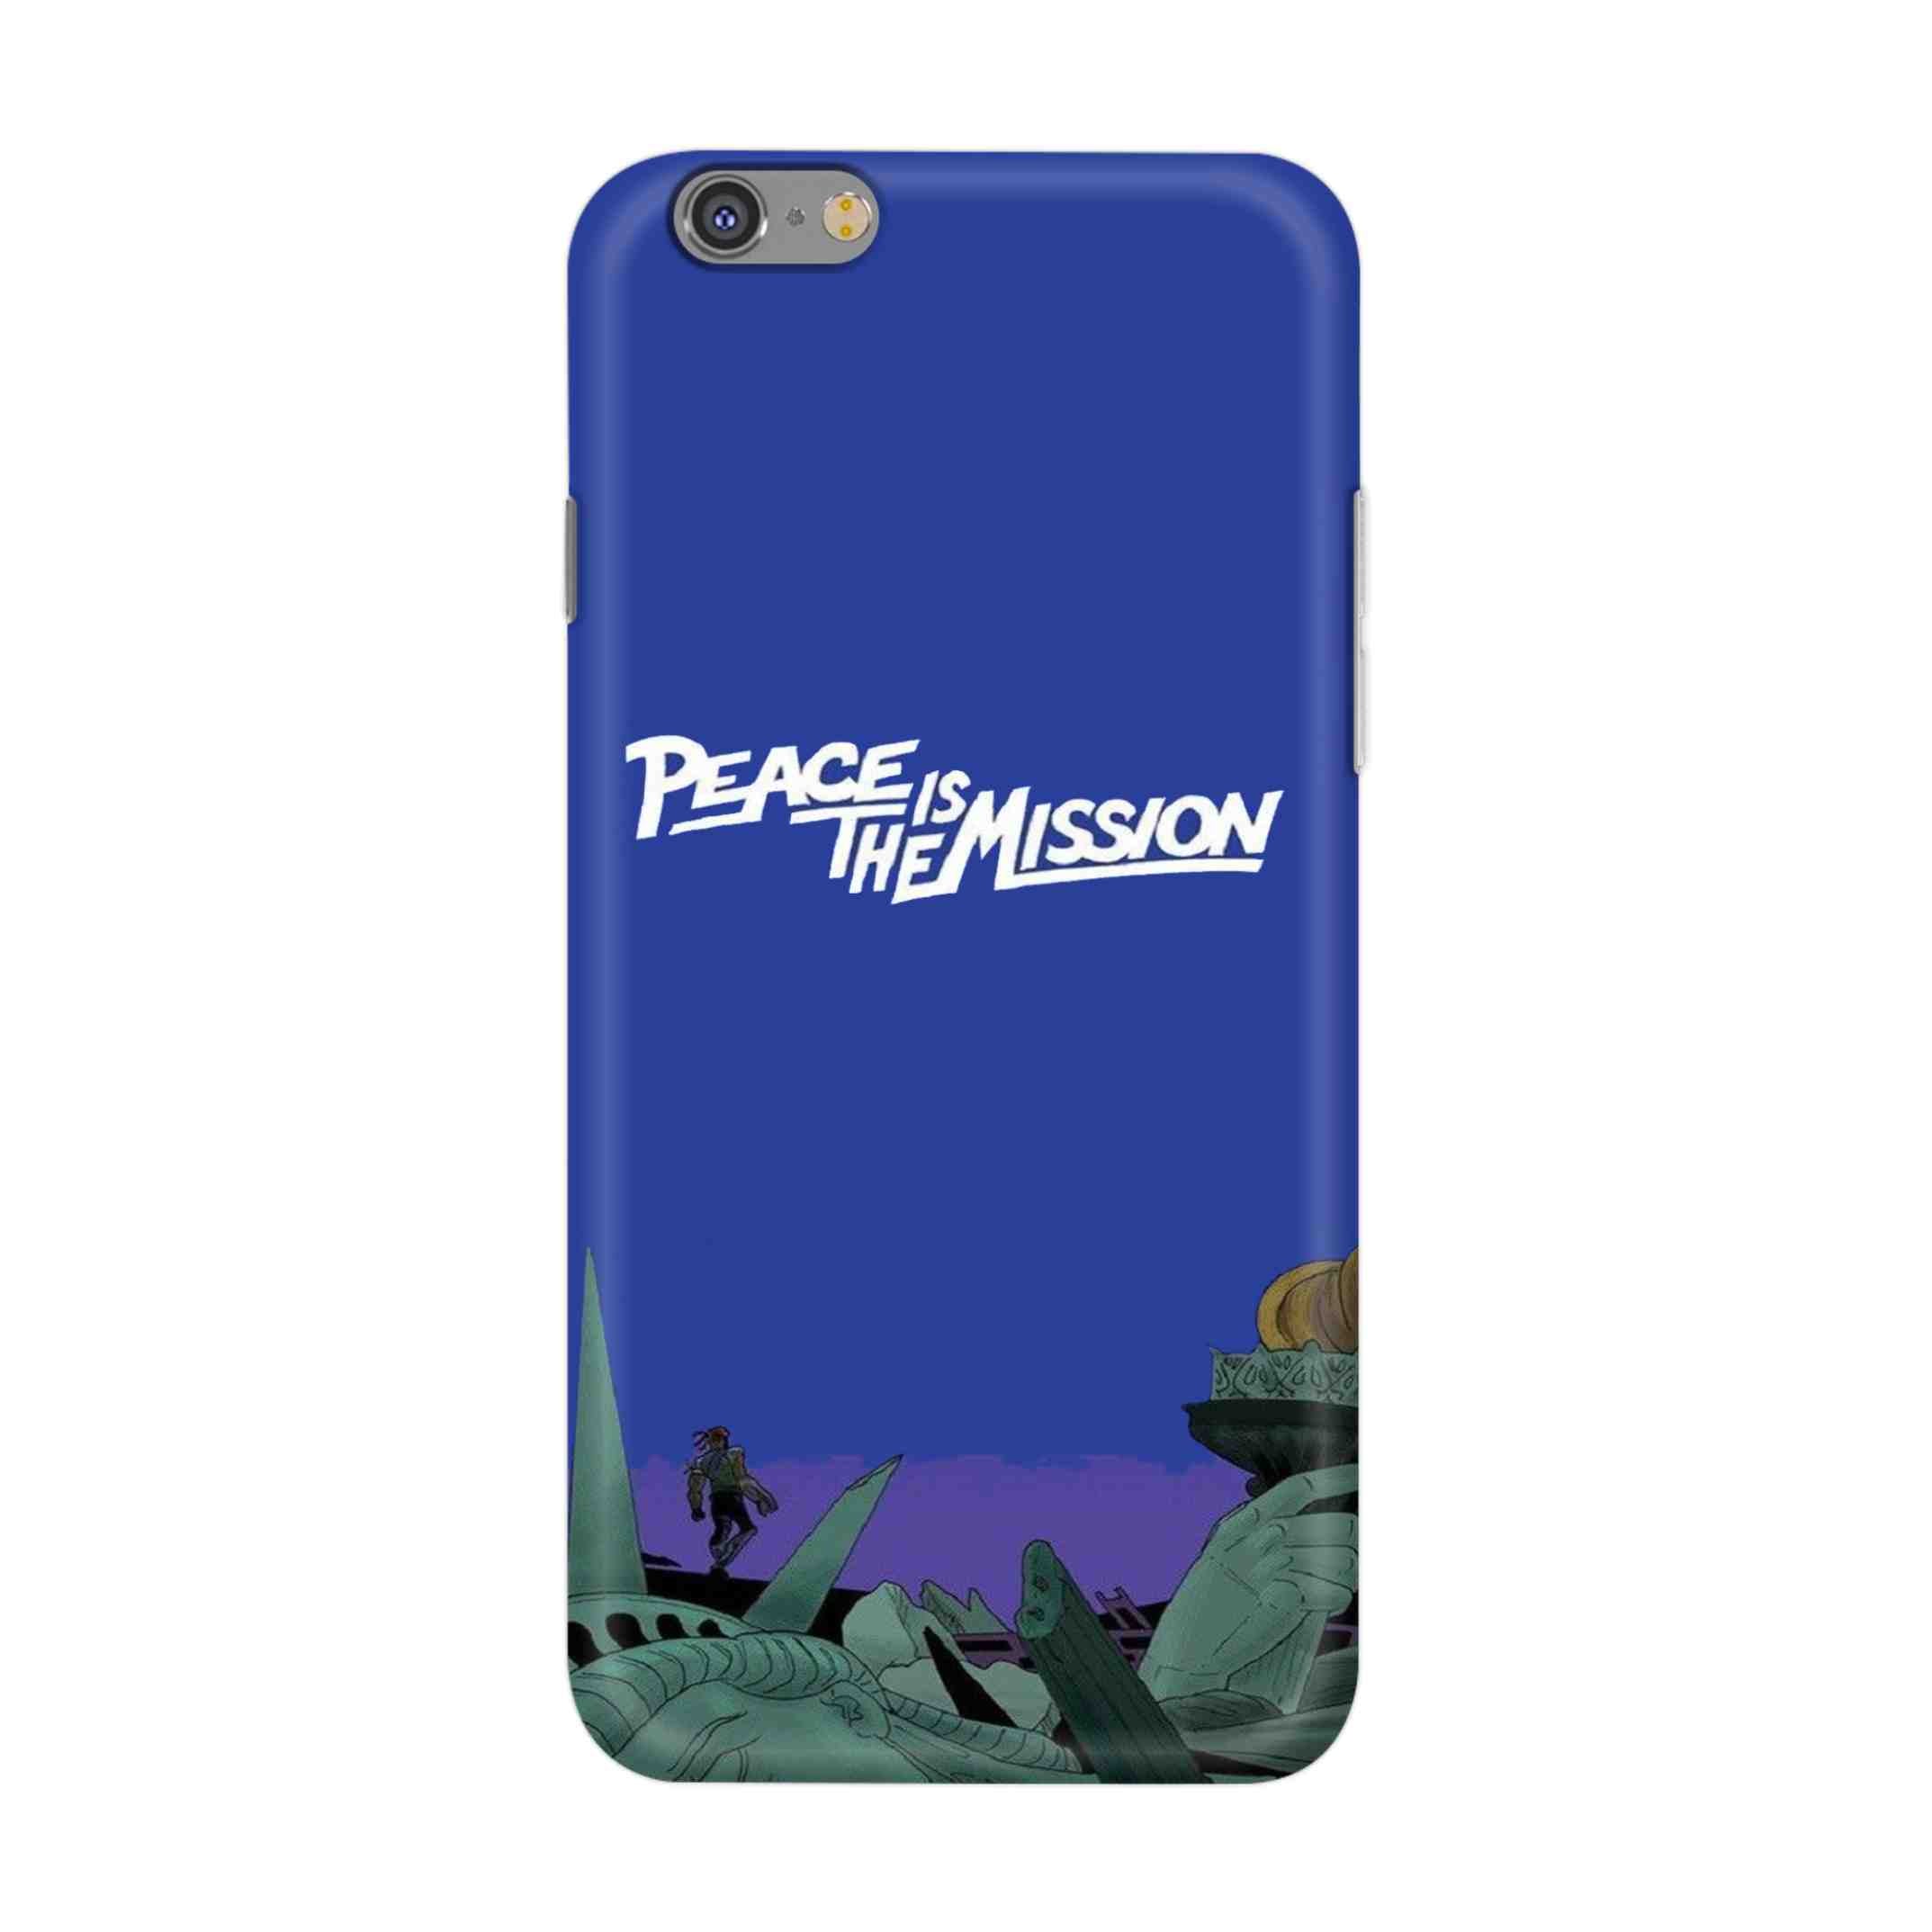 Buy Peace Is The Misson Hard Back Mobile Phone Case/Cover For iPhone 6 / 6s Online